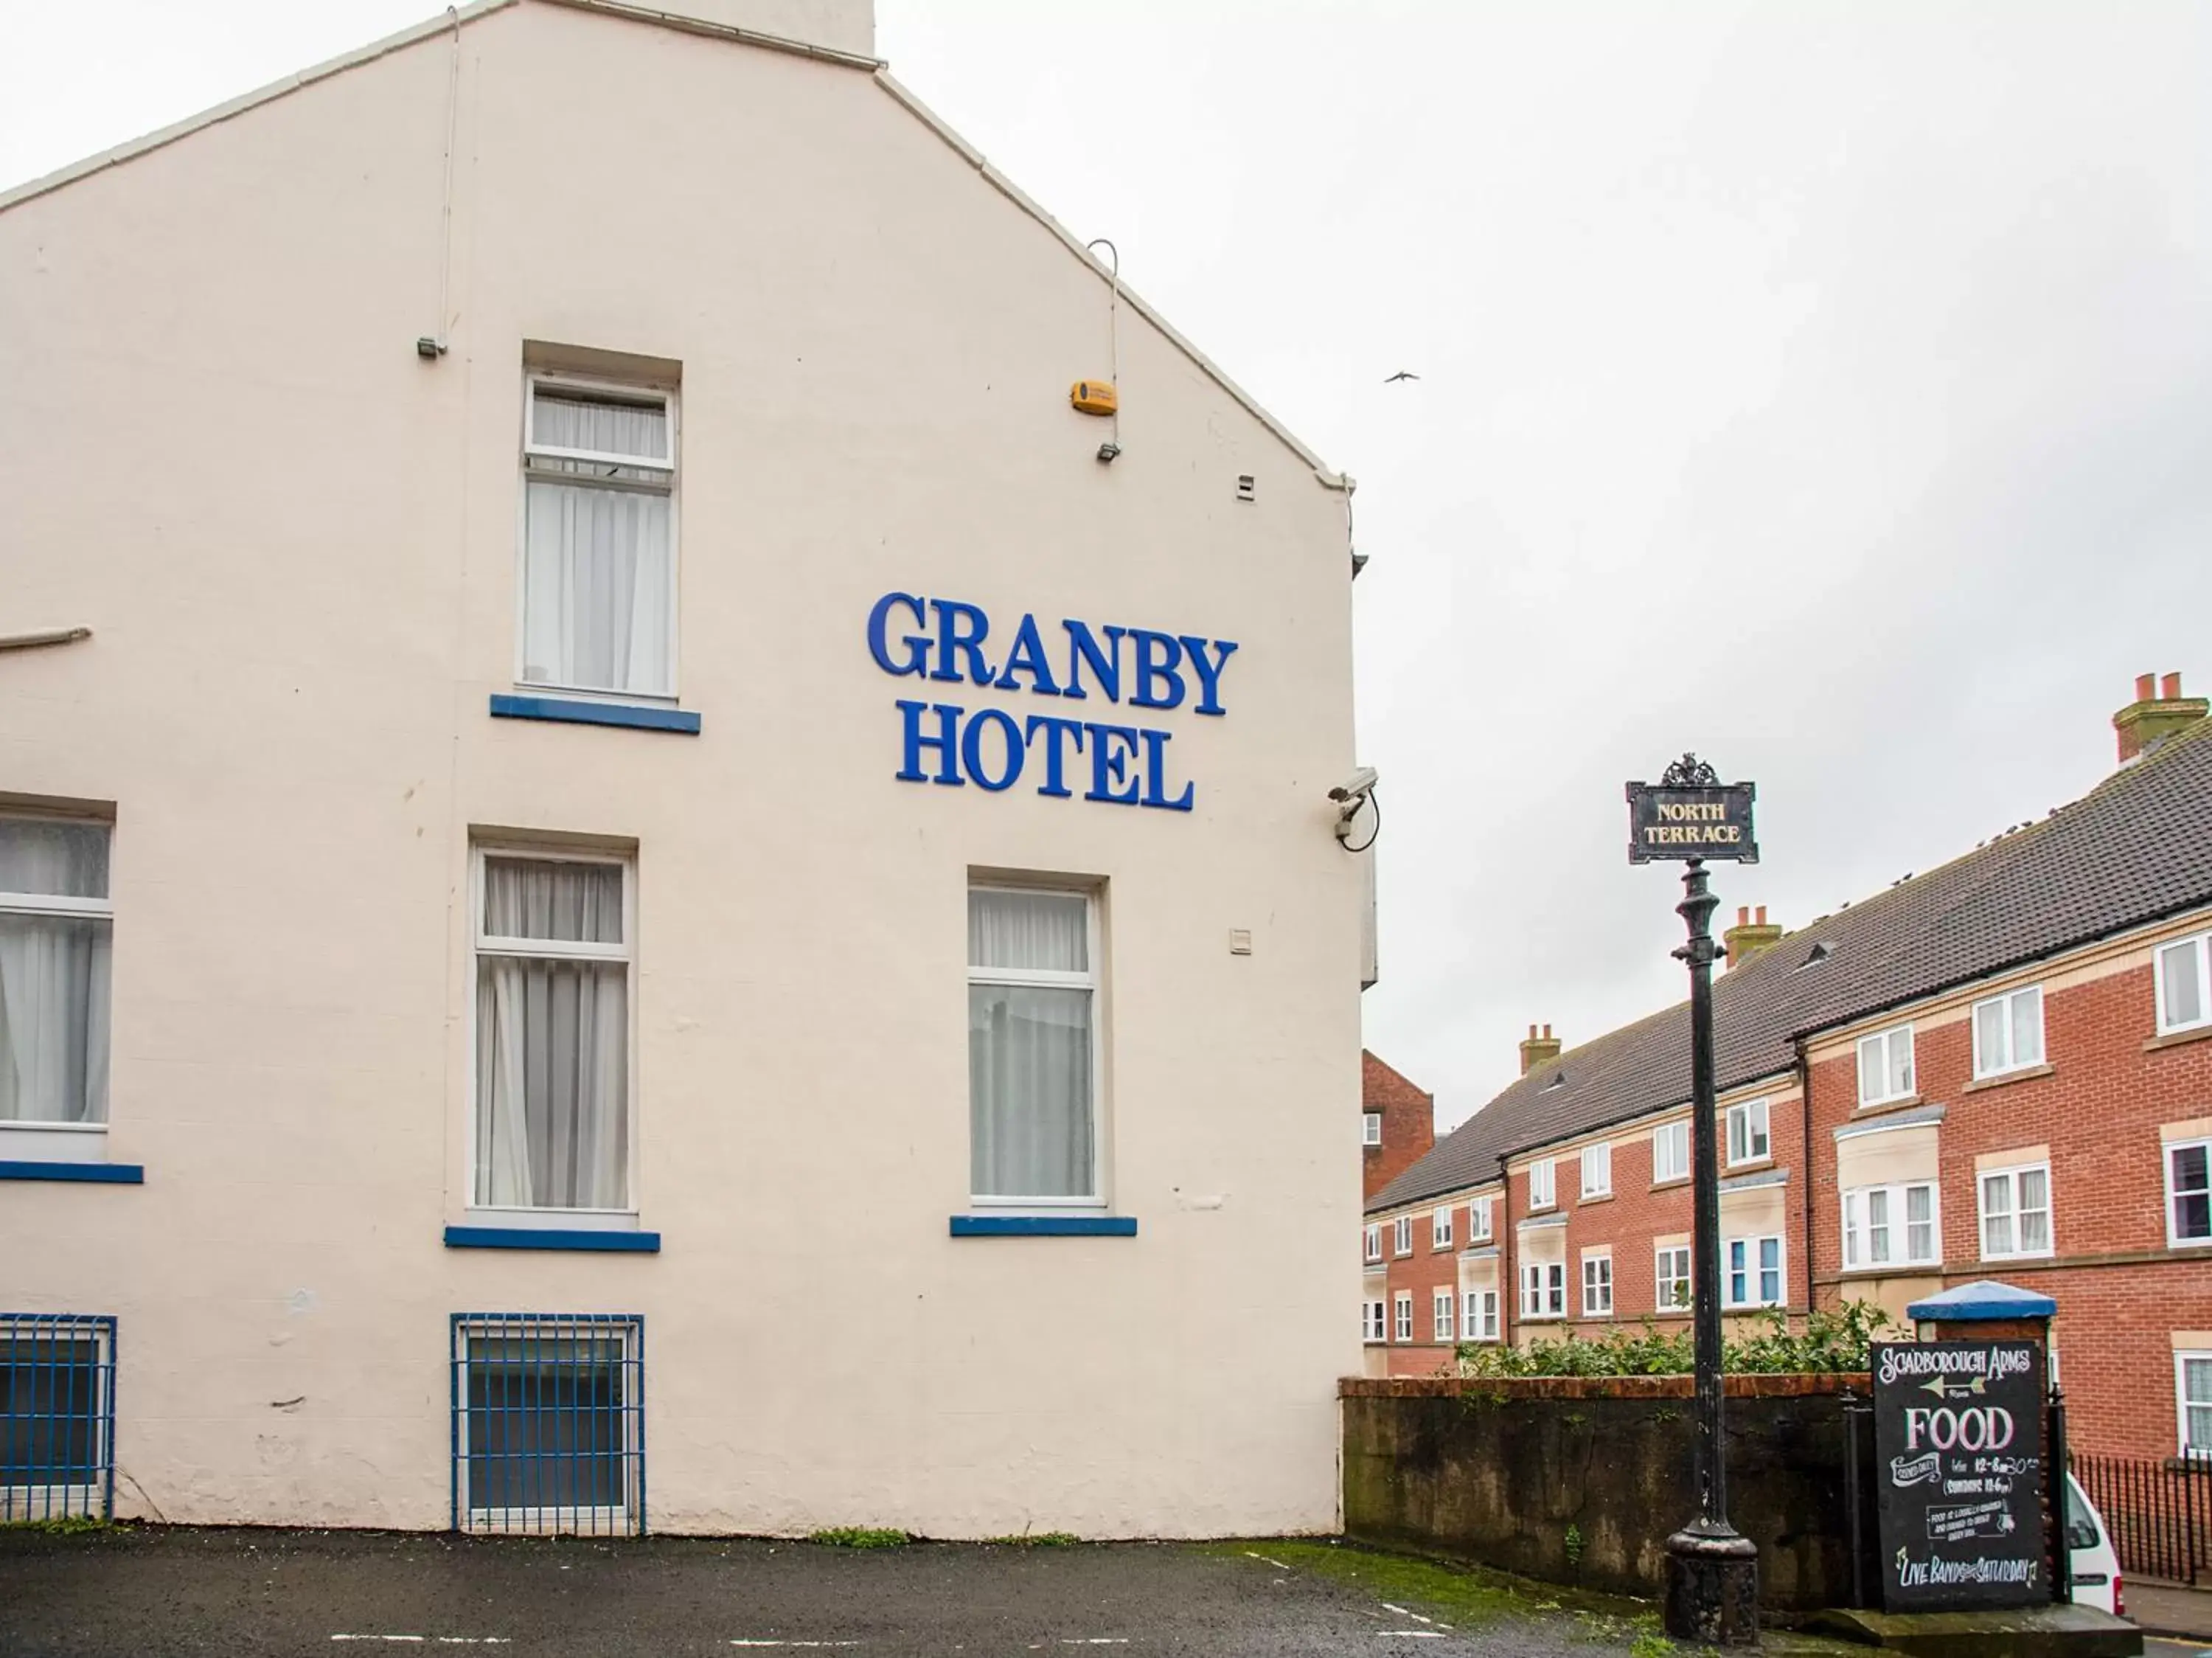 Property Building in Granby Hotel